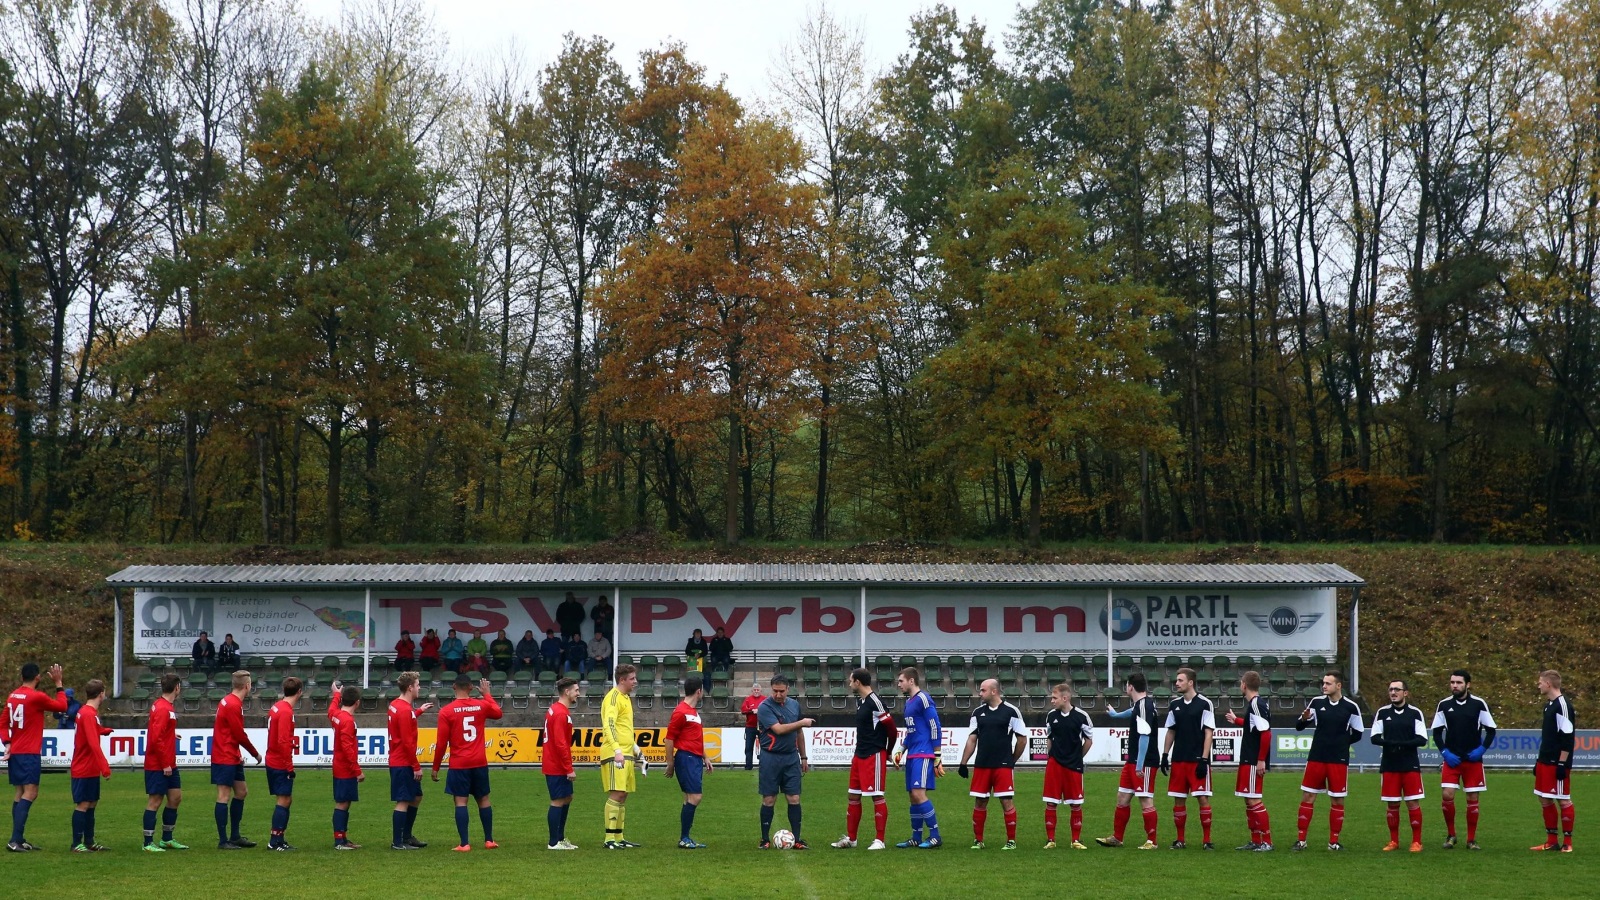 Former FIFA referee Hamdi Al Kadri conducts a German 9th division soccer match between TSV Pyrbaum and FC Altdorf in Pyrbaum, southern Germany, November 6, 2016. Picture taken November 6, 2016. Syrian migrant Al-Kadri was member of the referee team at high level FIFA matches, such as World Cup bouts before he came to Germany as a Syrian refugee.  REUTERS/Michael Dalder